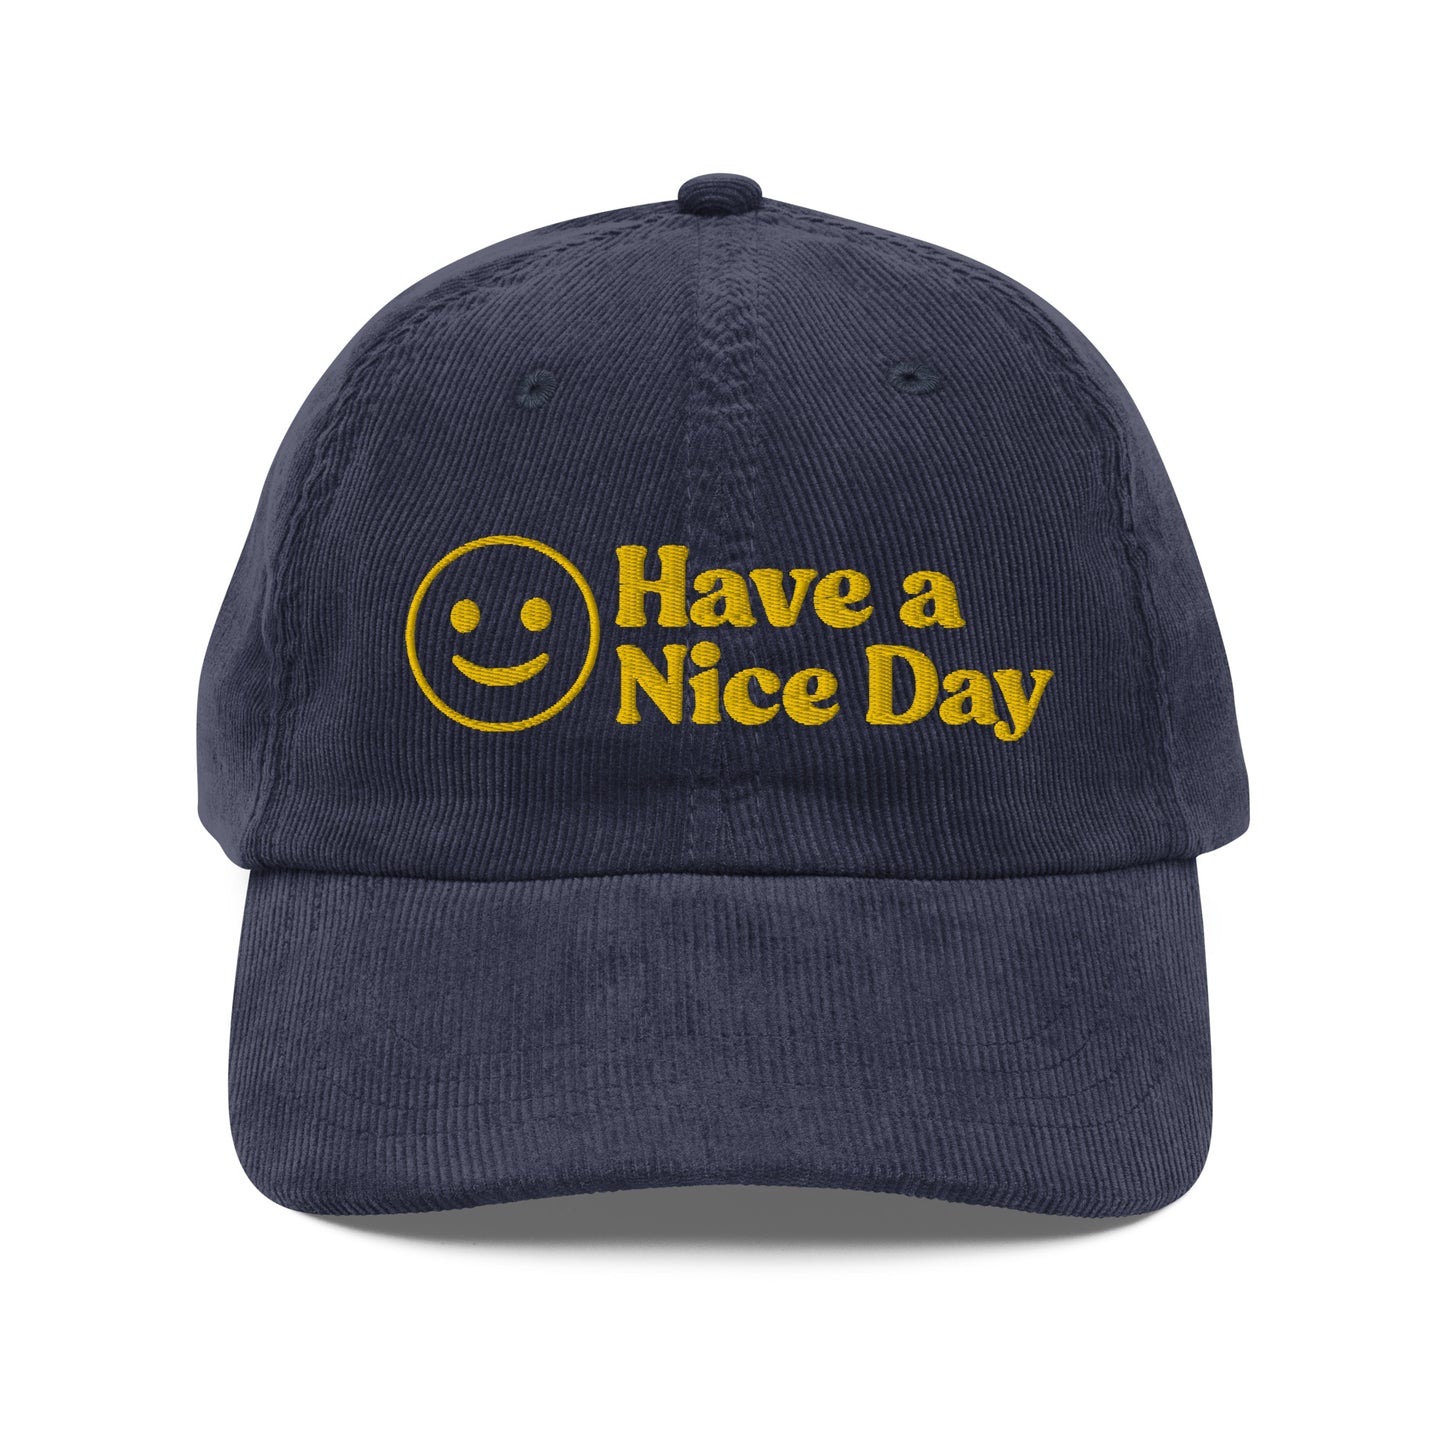 Have a Nice Day Smiley Face Vintage Corduroy Hat